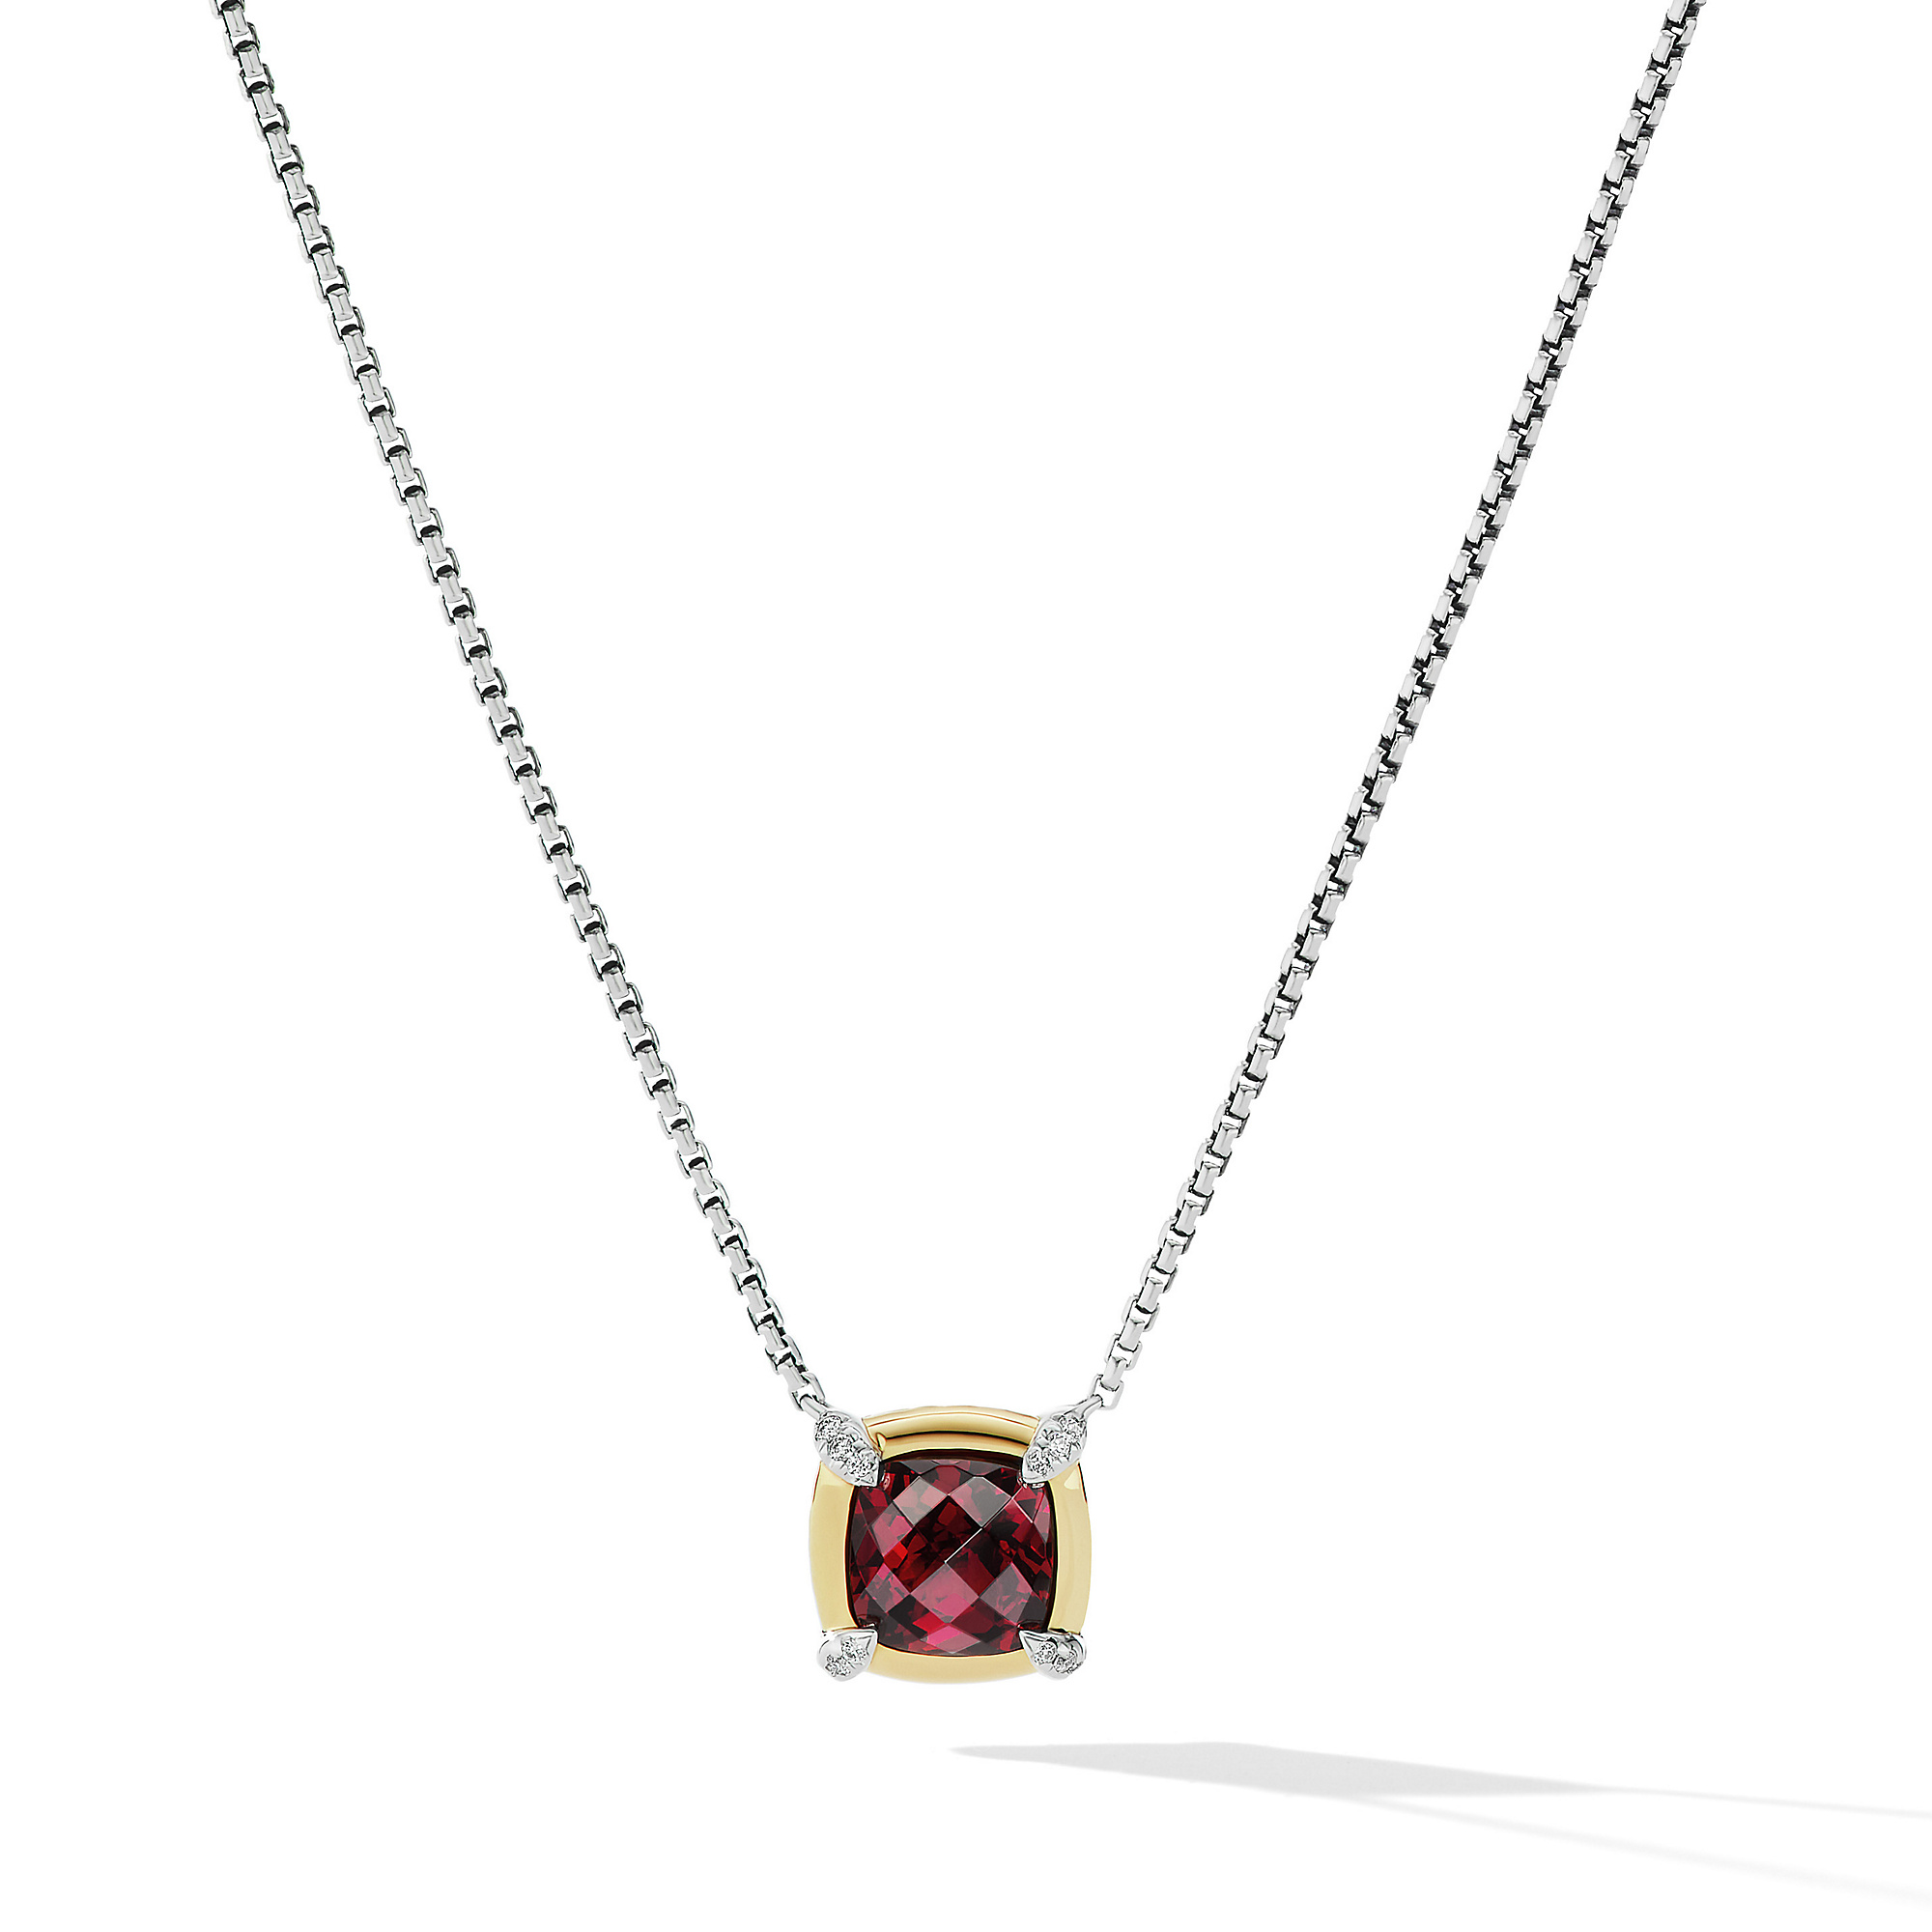 Petite Chatelaine® Pendant Necklace with Garnet, 18K Yellow Gold Bezel and Pave Diamonds